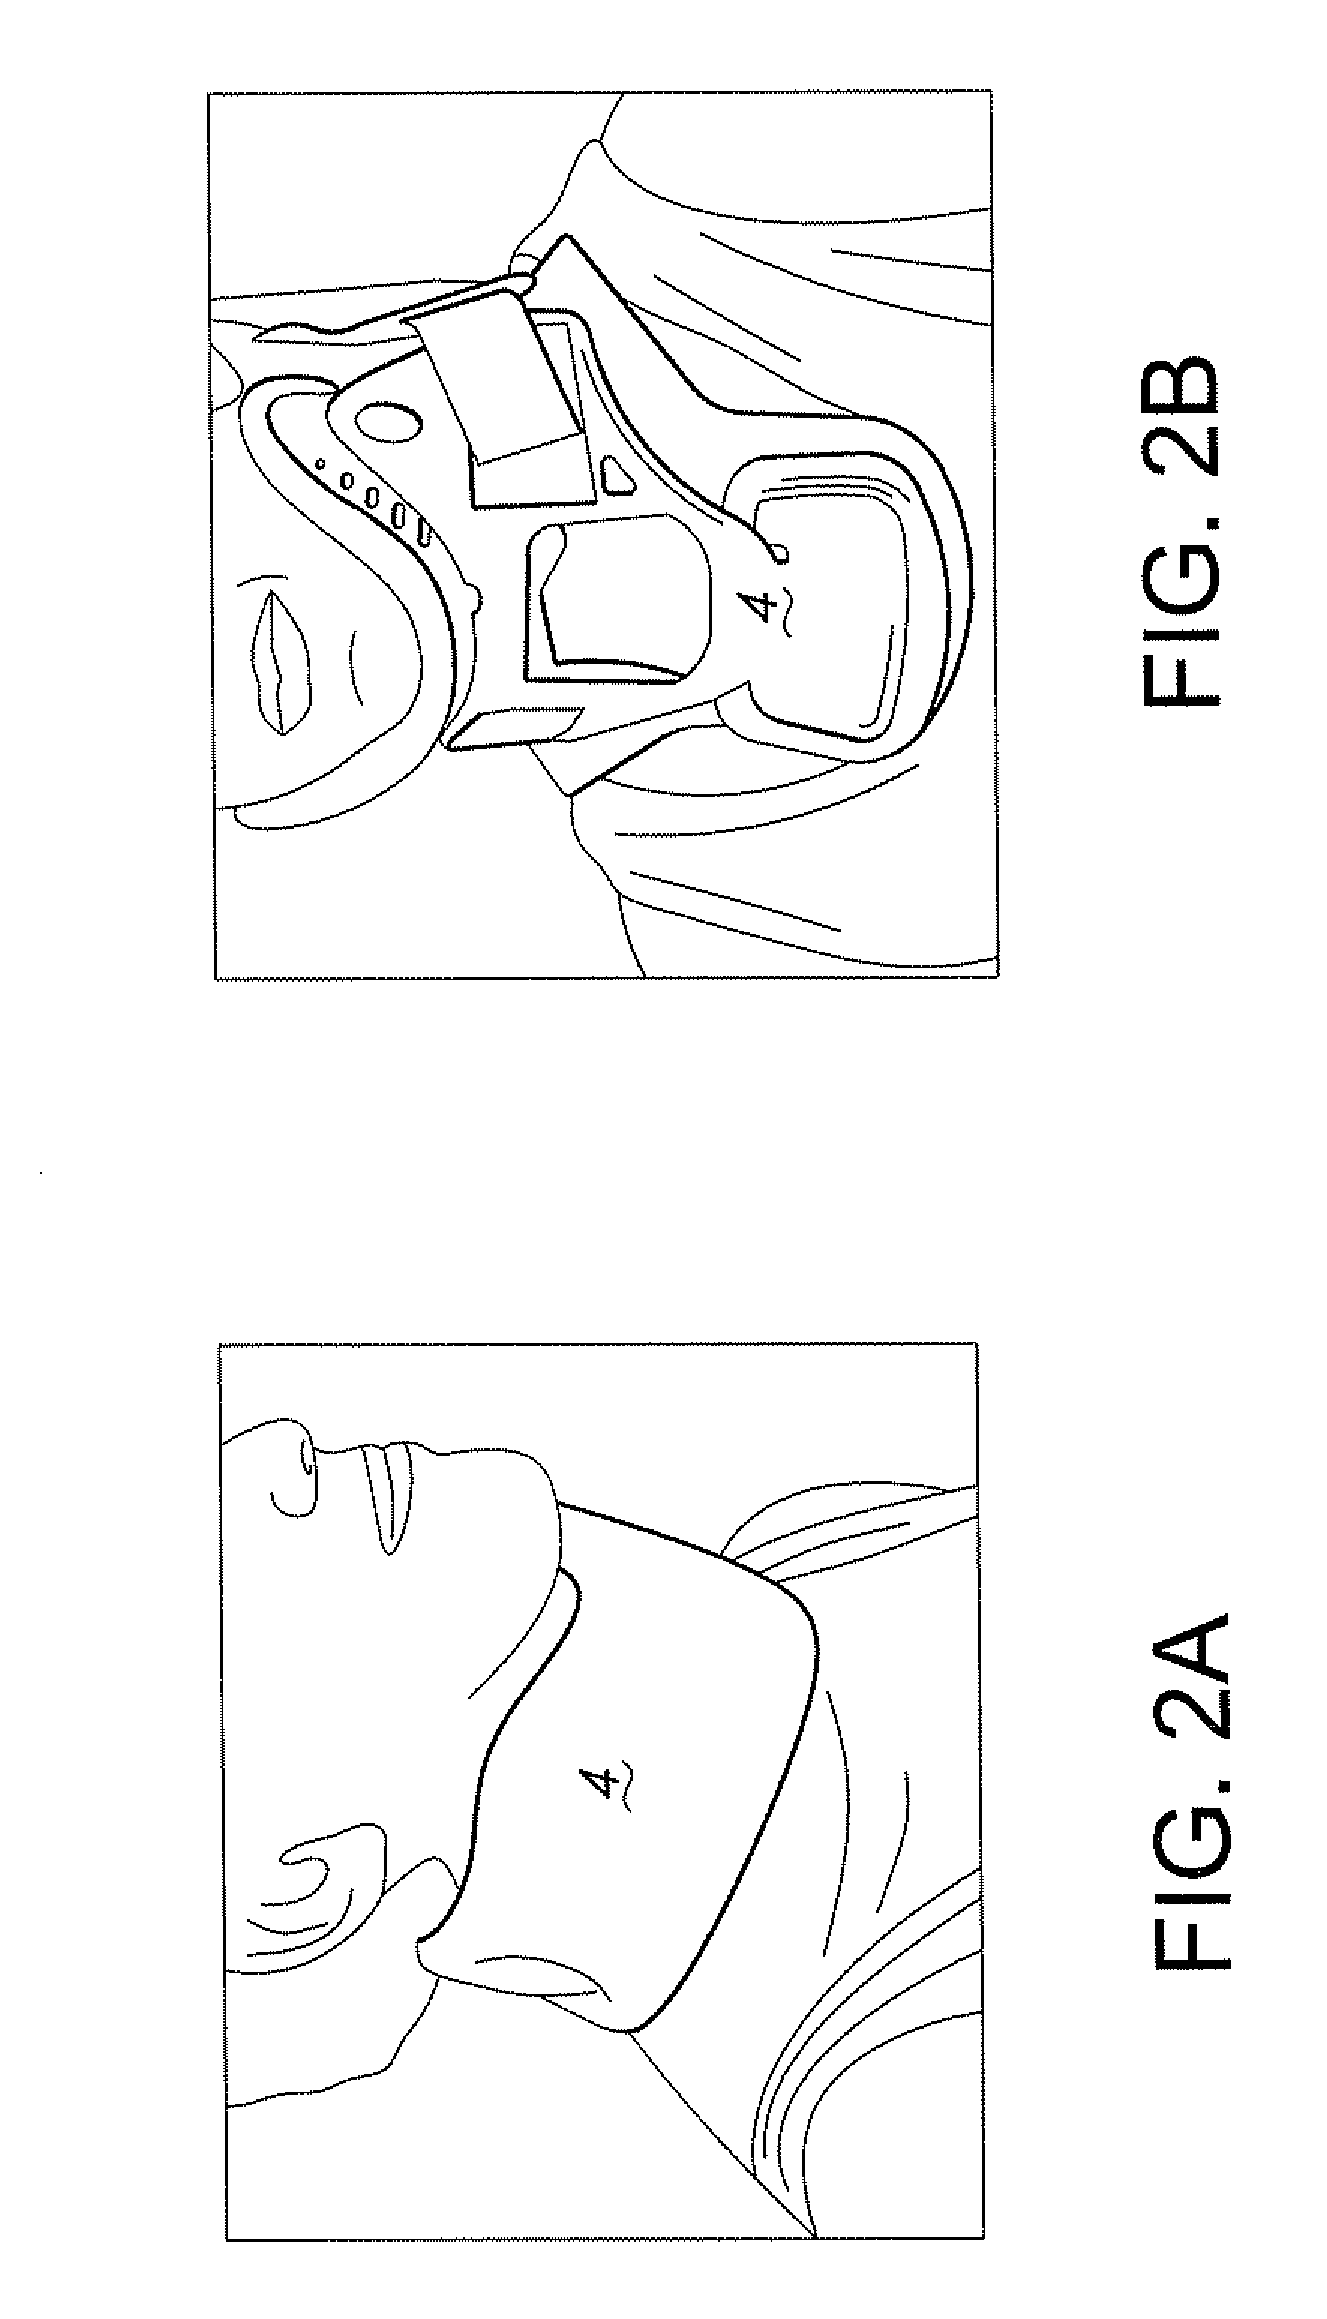 Magnetic device for guiding catheter and method of use therefor